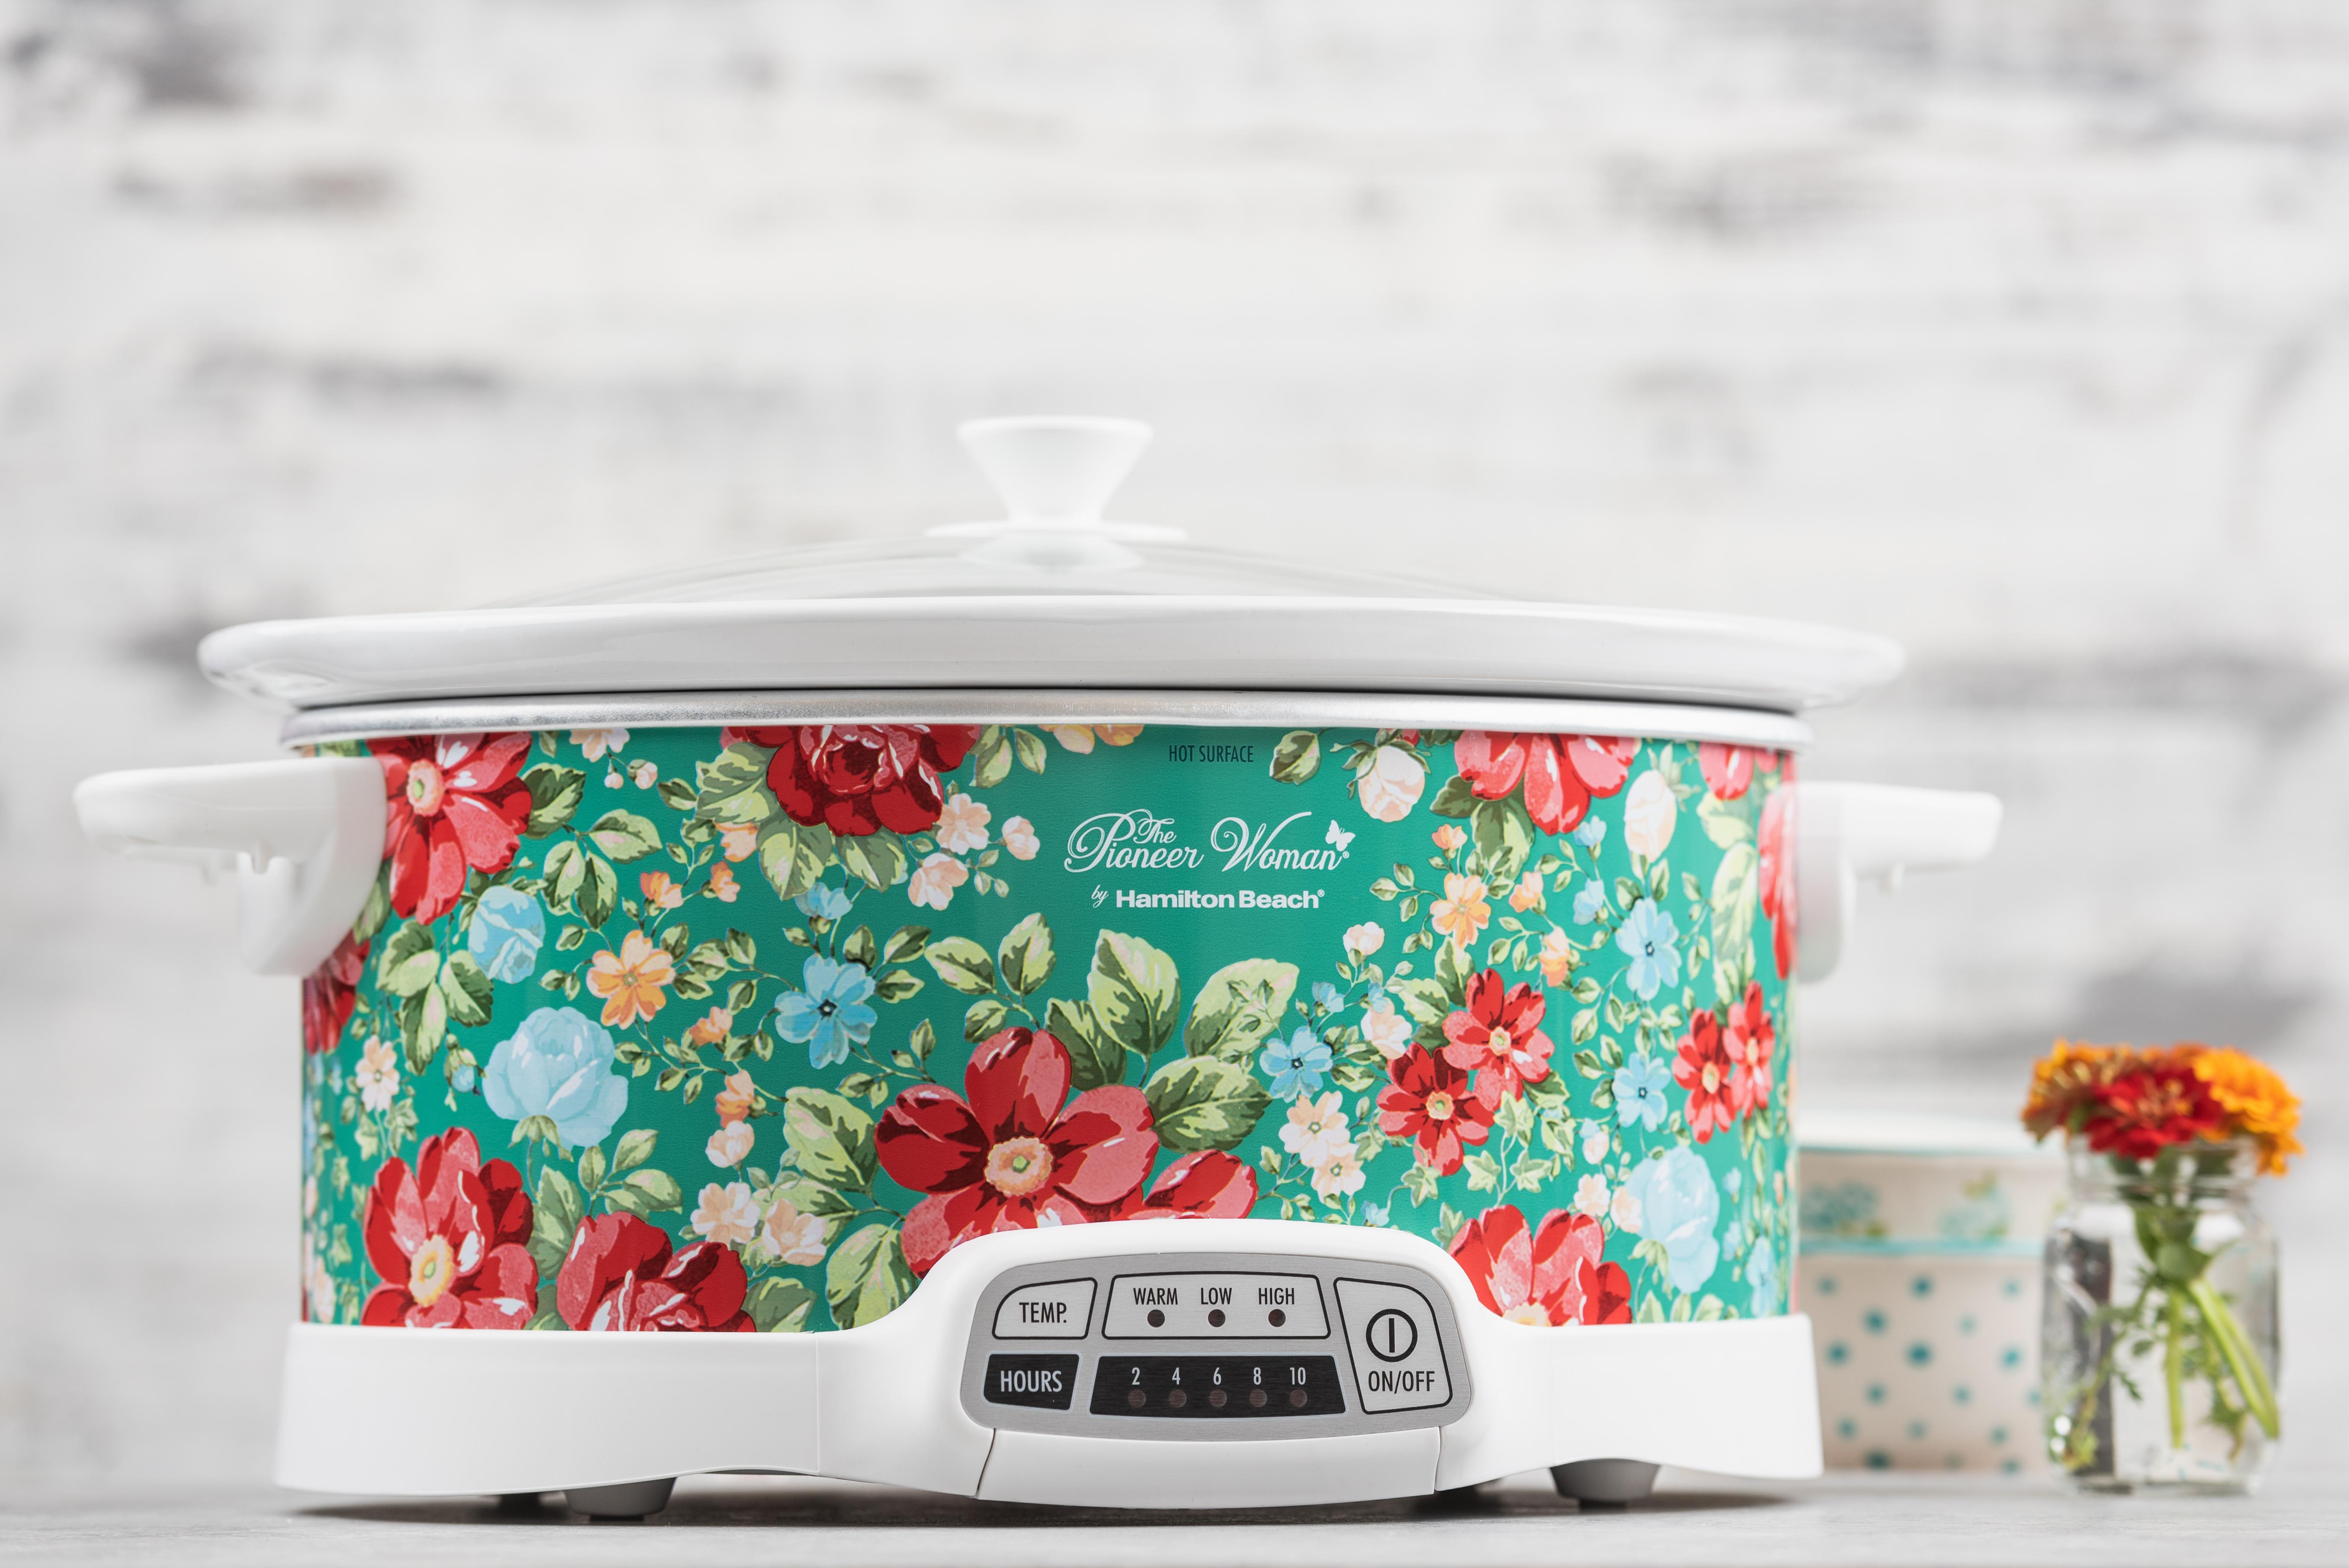 Pioneer Woman Slow Cooker this fall @ Walmart!